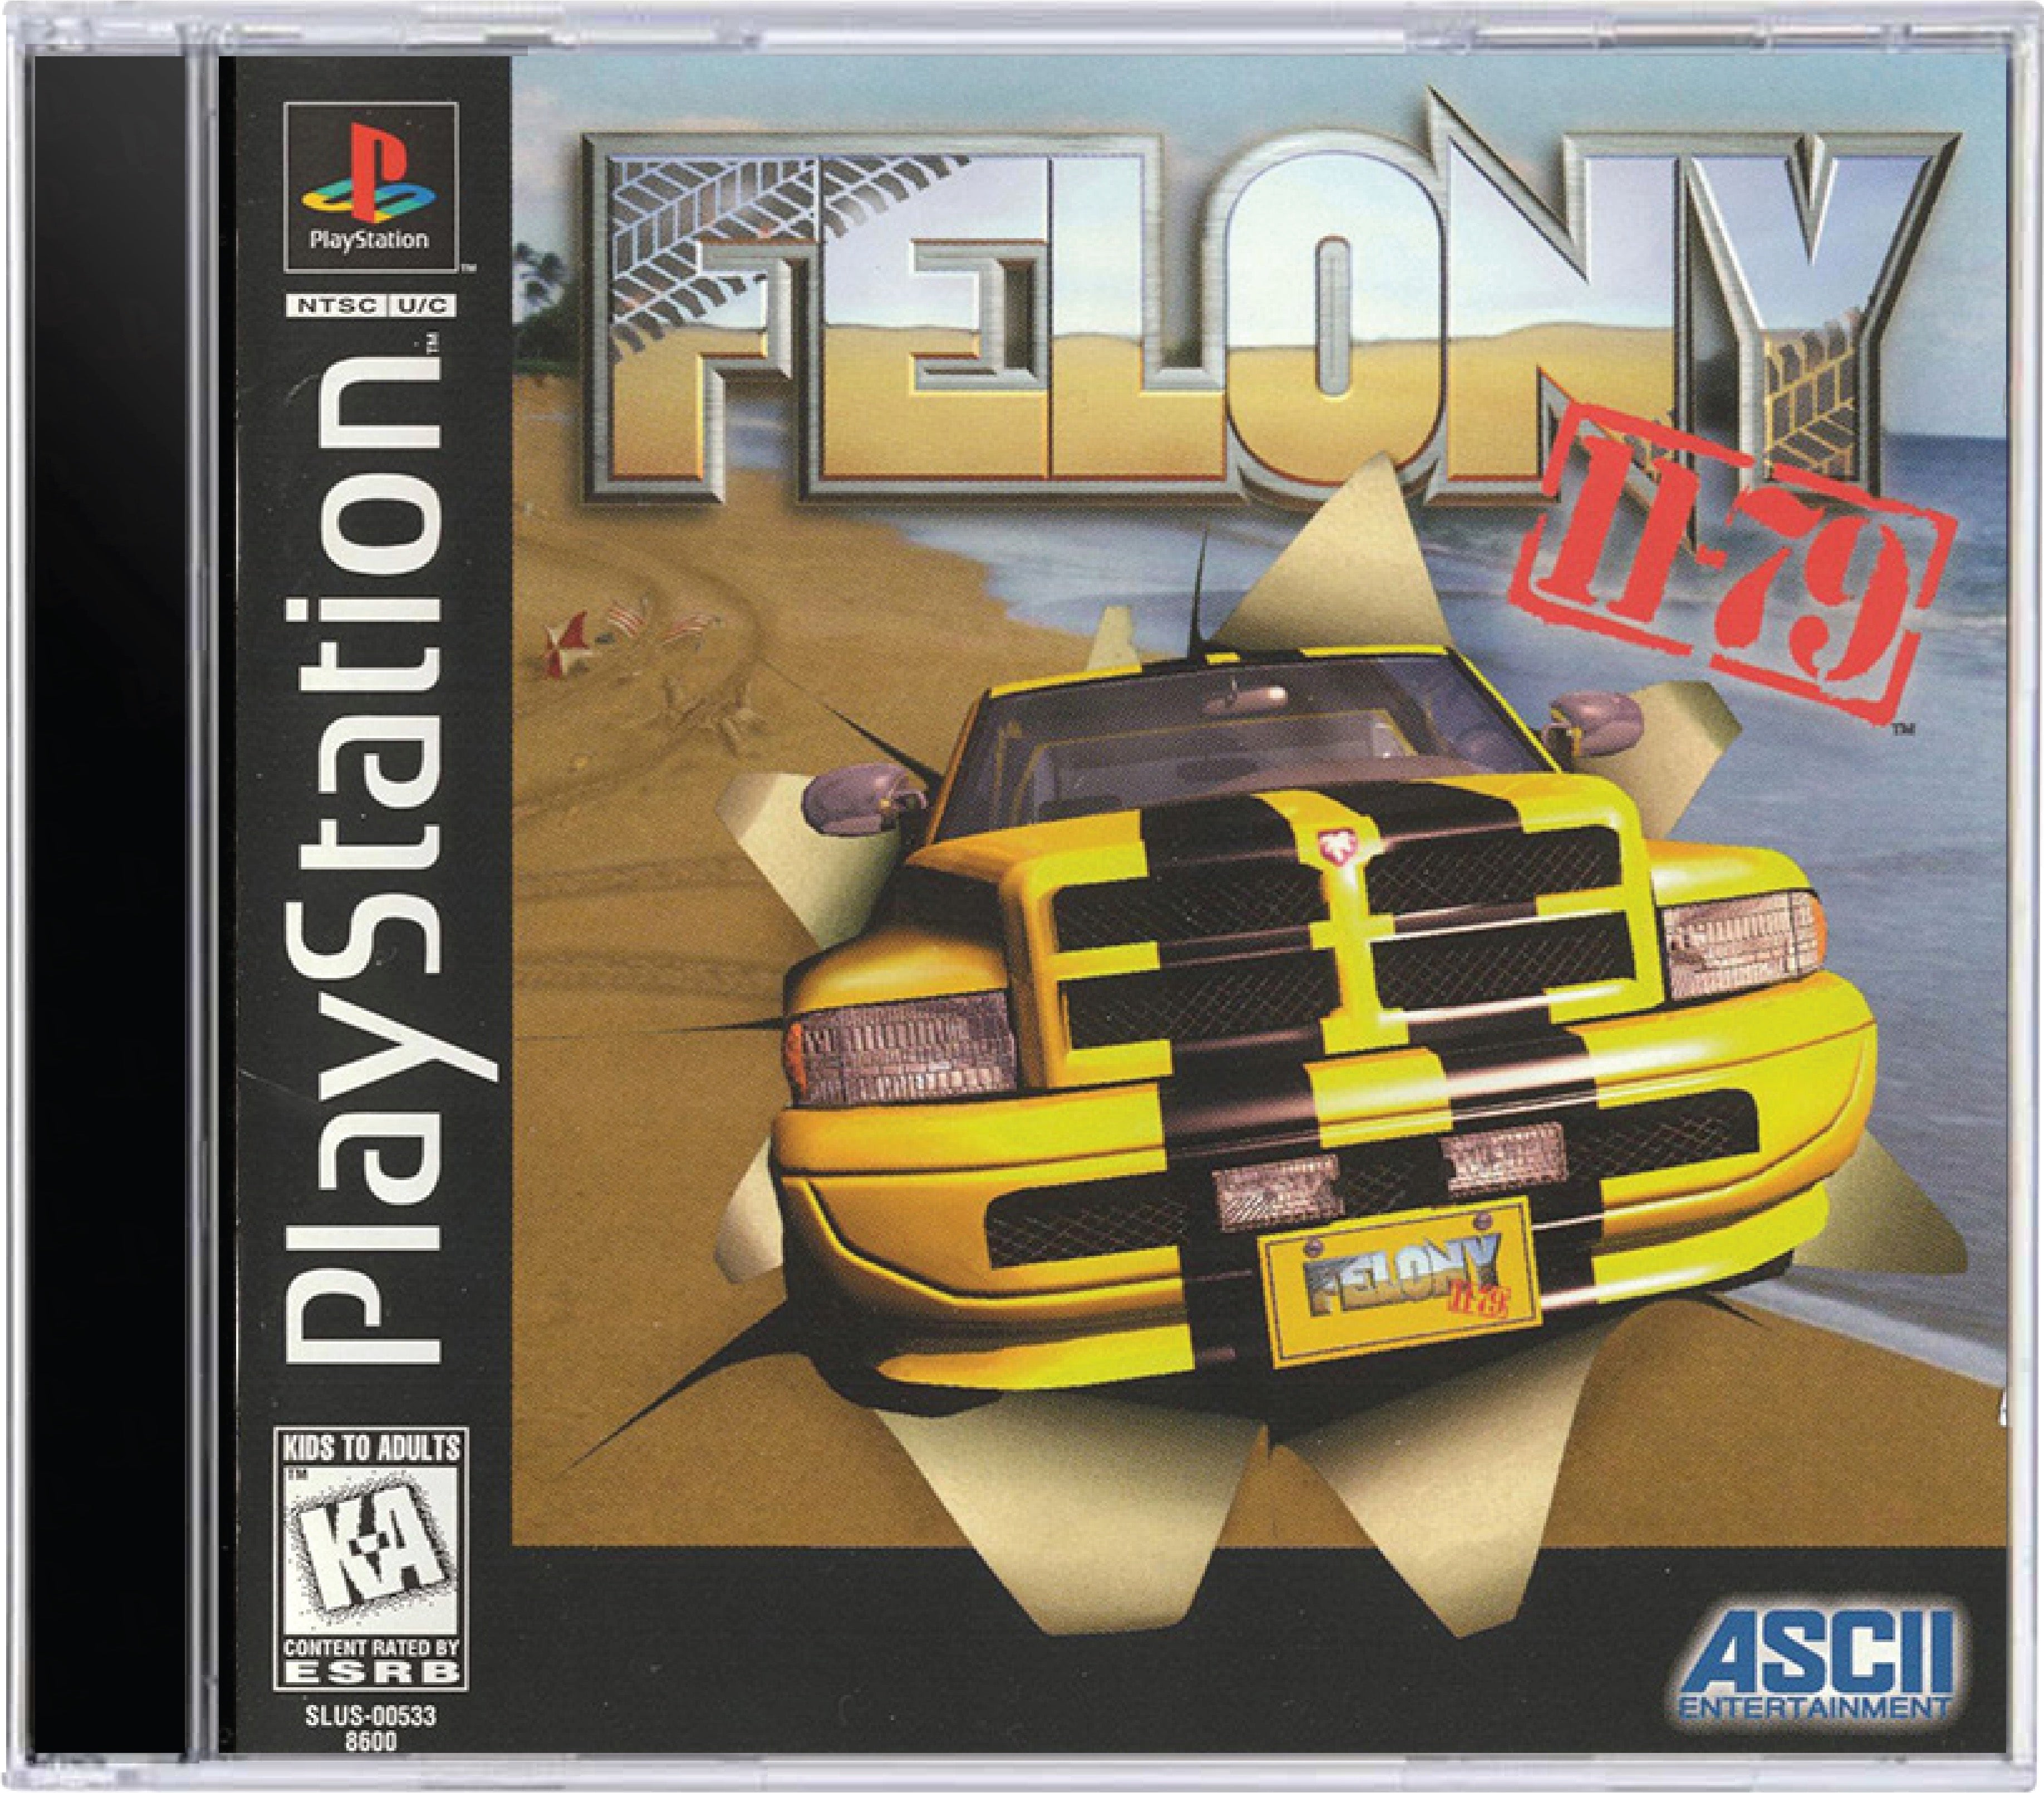 Felony 11-79 Cover Art and Product Photo